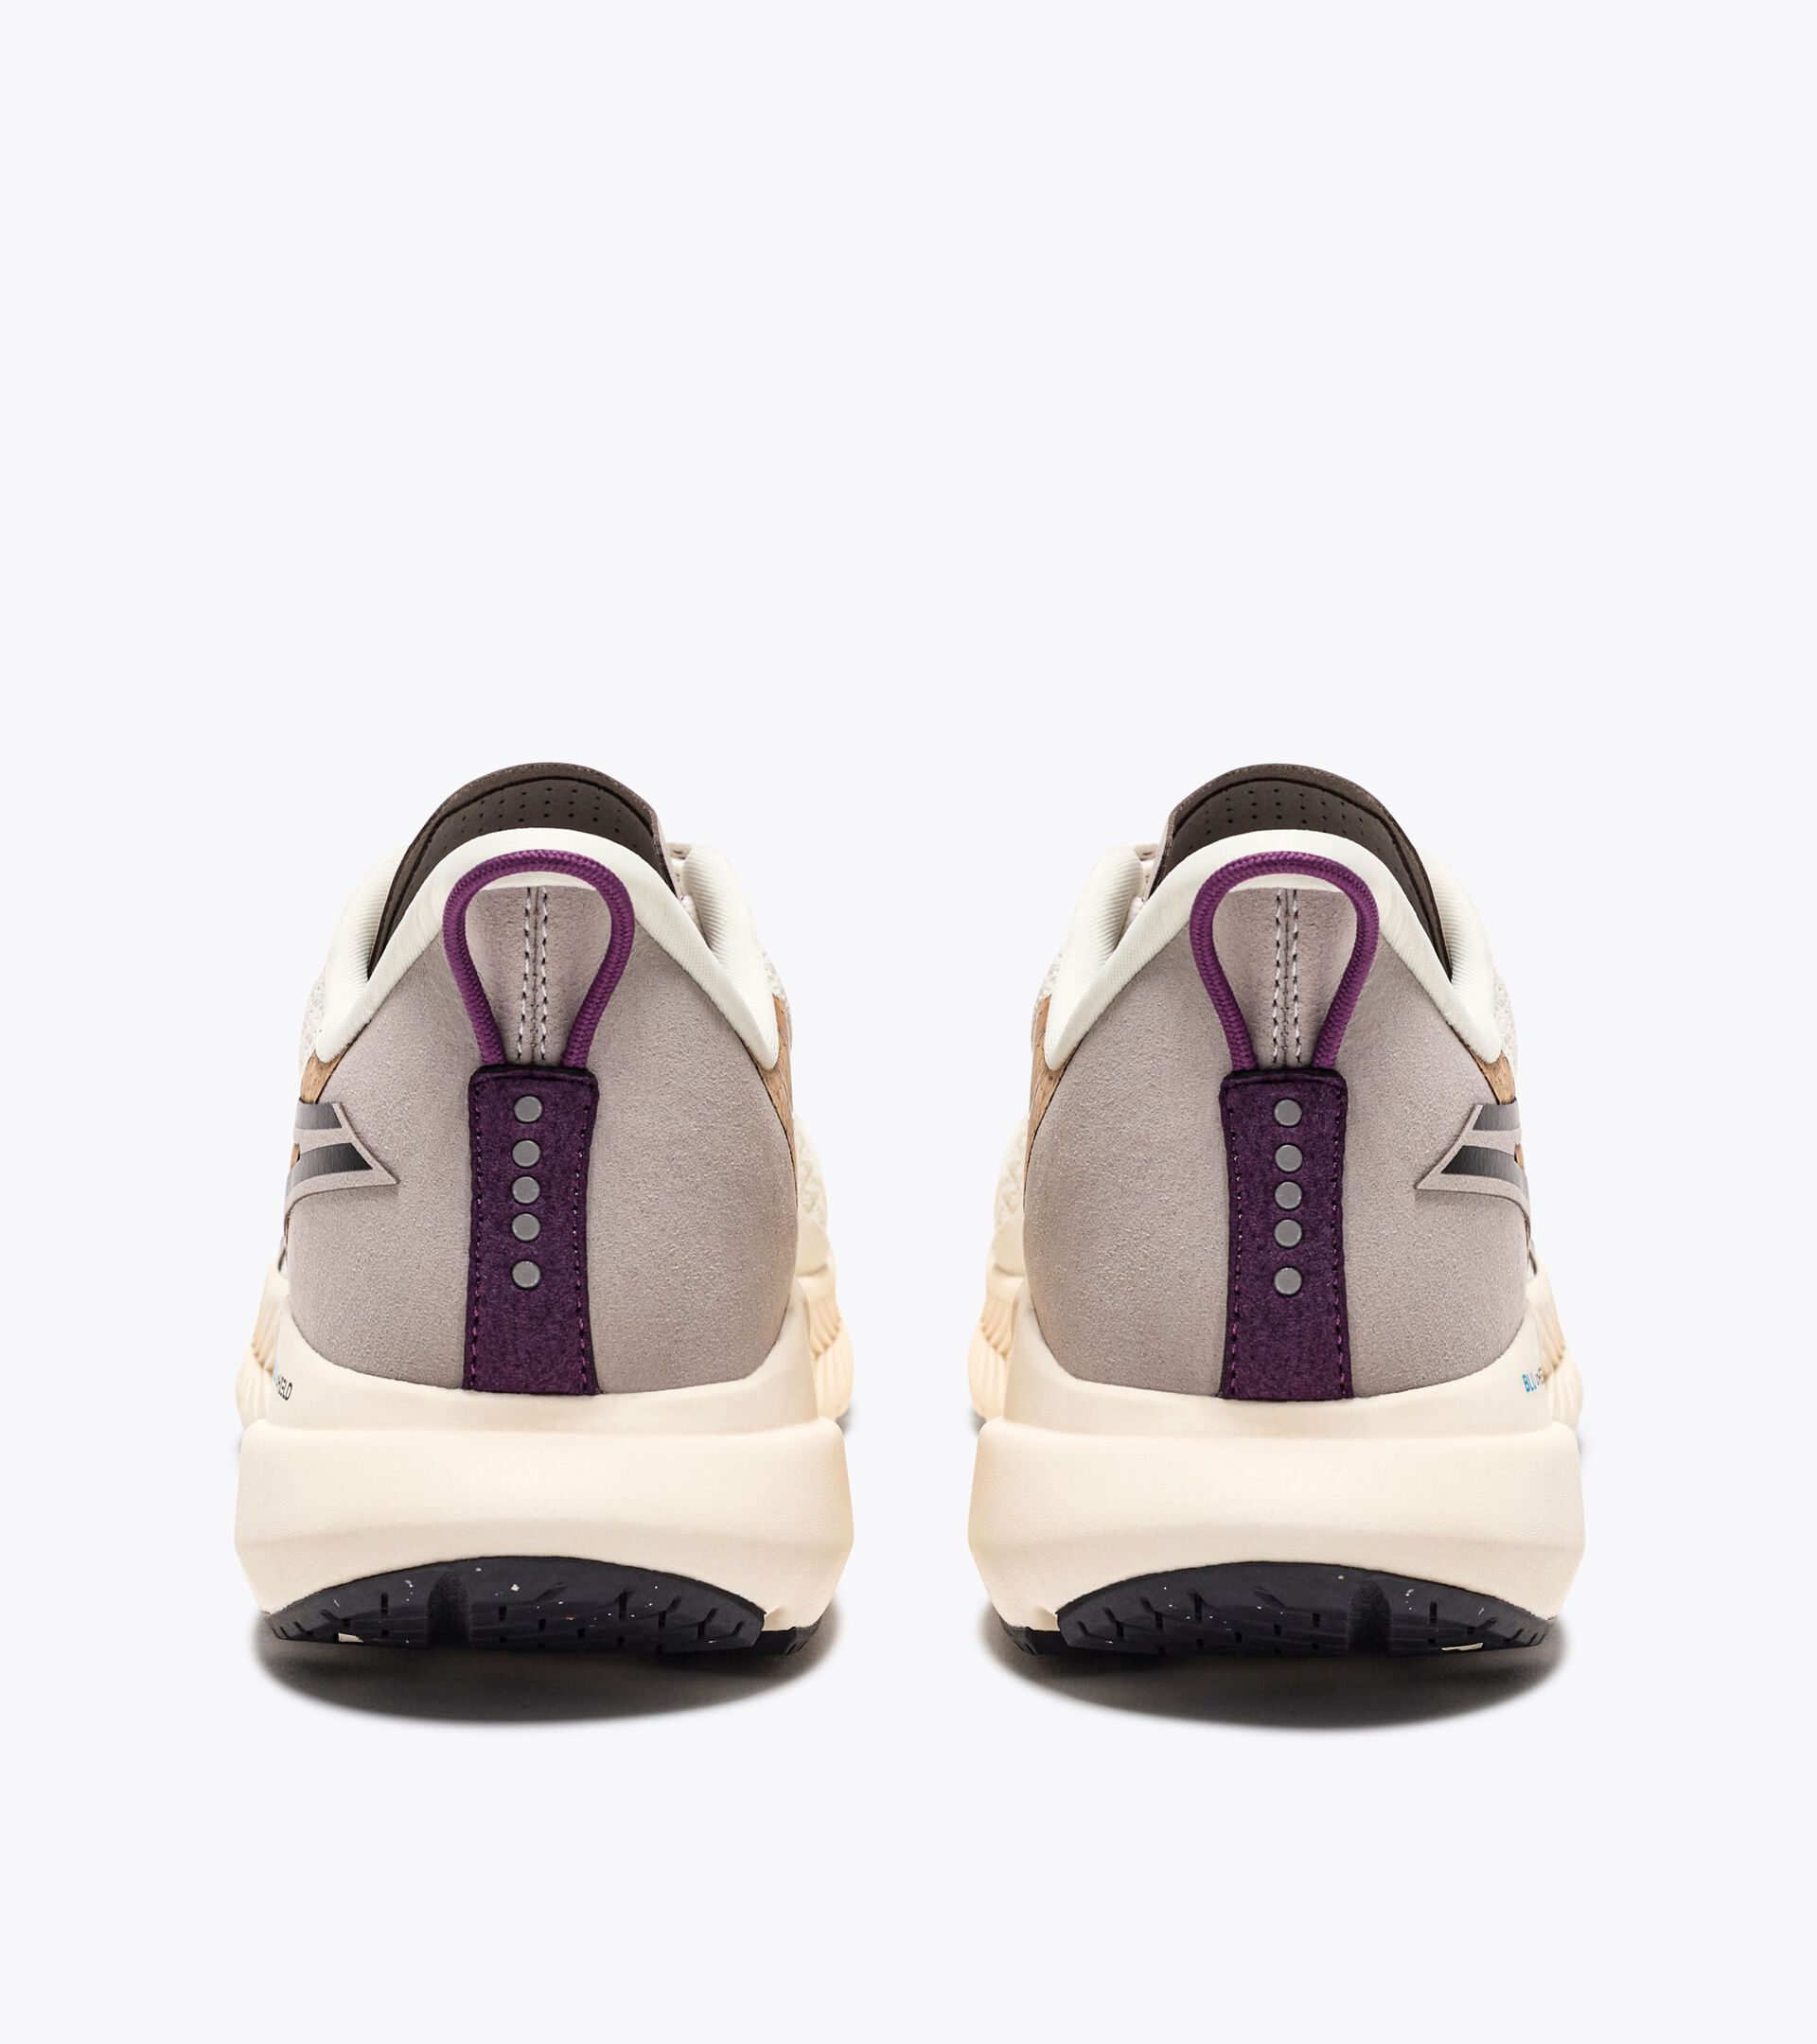 Running shoe - Women's - Crafted from materials with reduced environmental impact MYTHOS BLUSHIELD VOLO 4  W 2030 WHISPER WHT/BLK/SUNSET PURPLE - Diadora